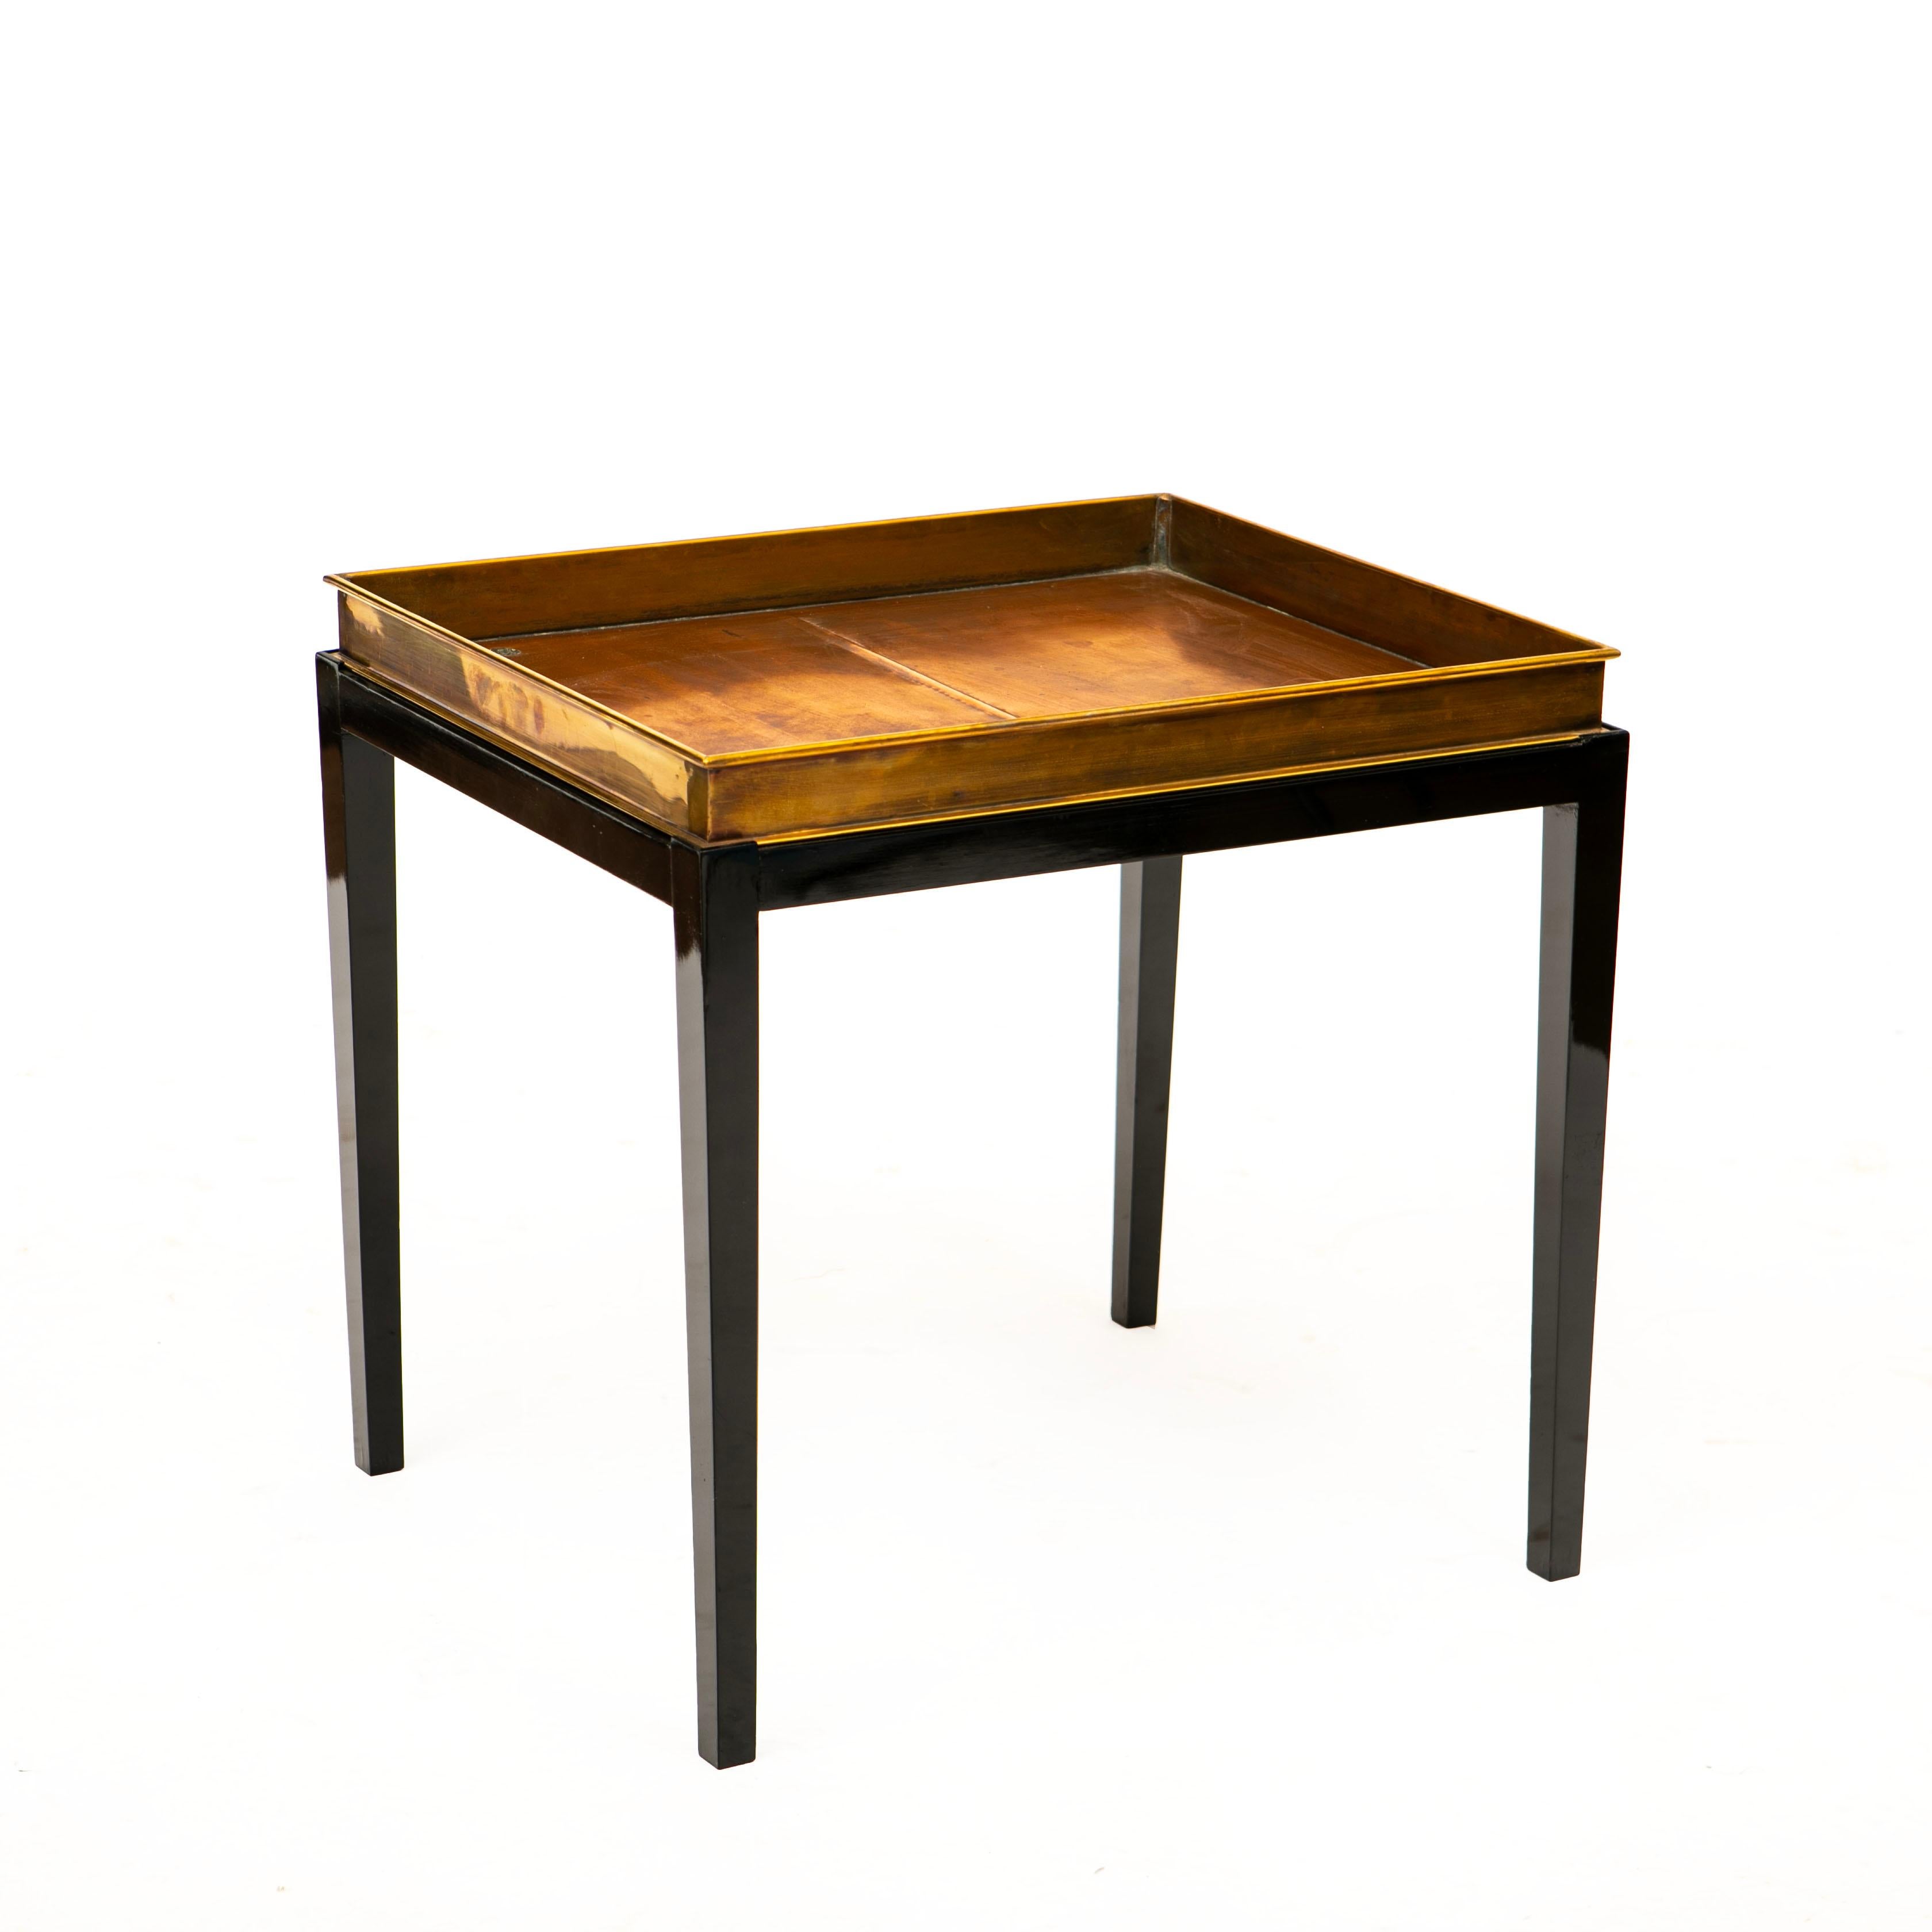 Tray table in brass and copper 
Placed on a black polished mahogany base.
The tray is an old beer tray .

Denmark approx. 1950.